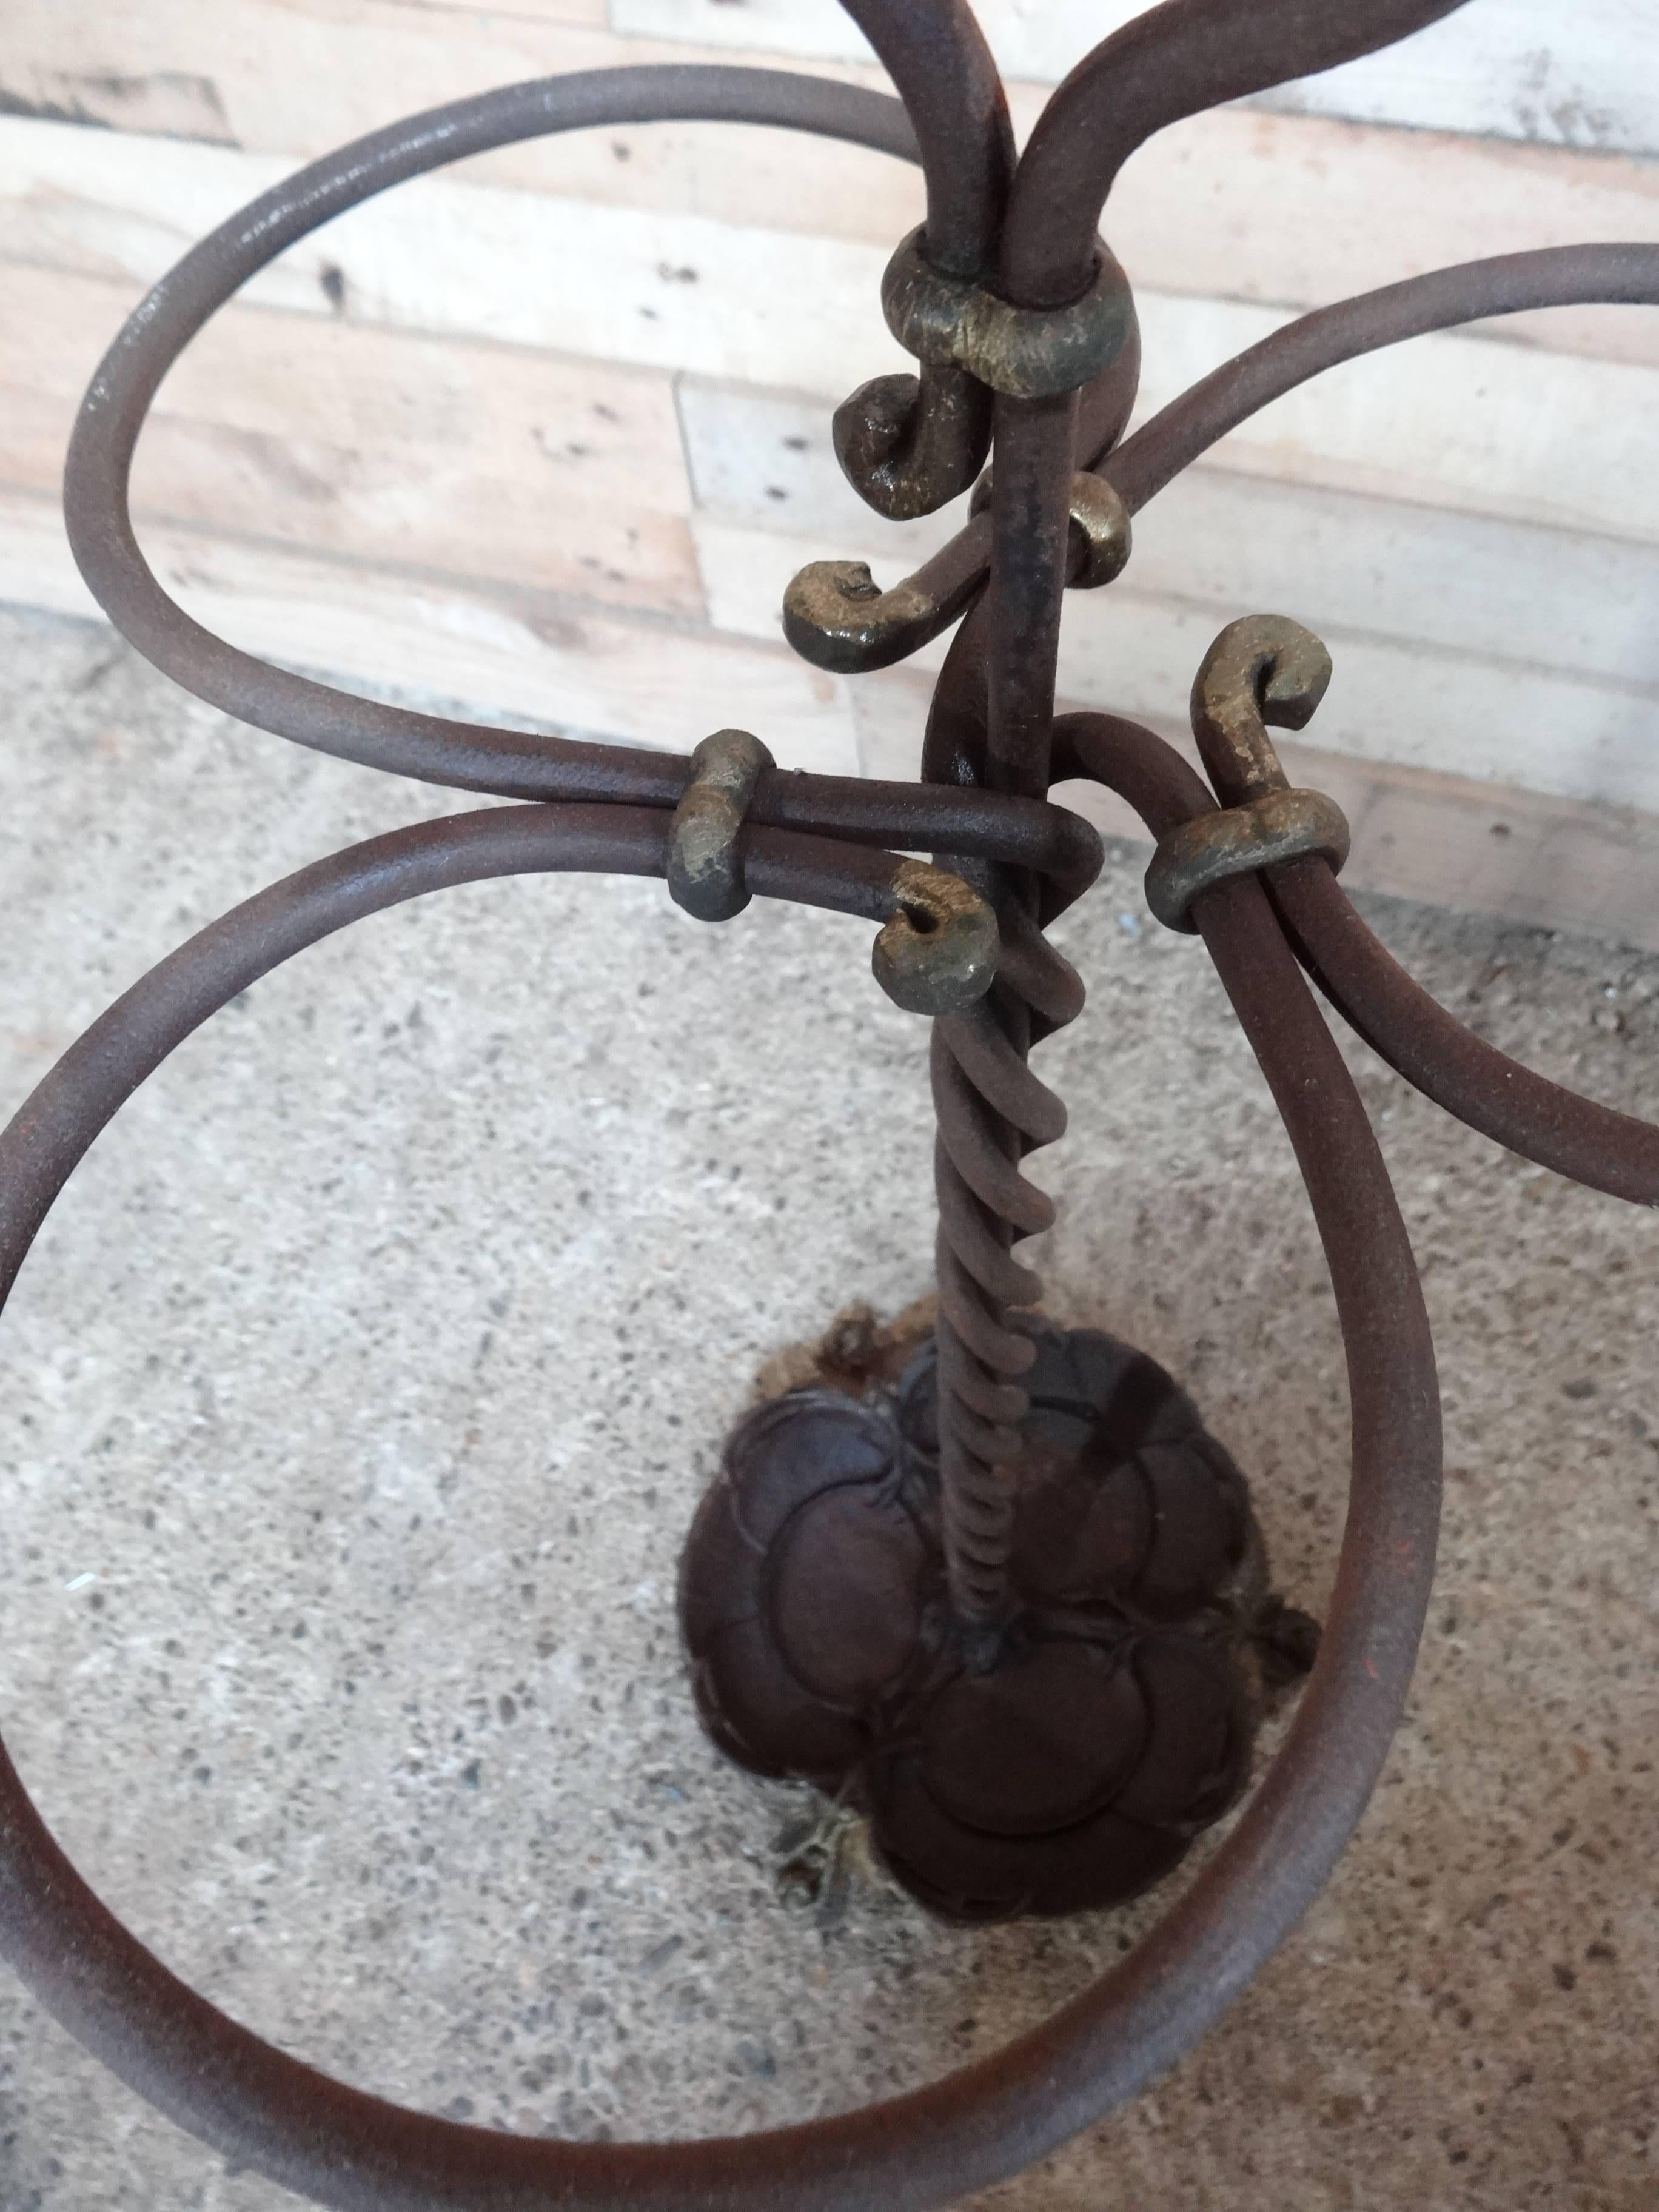 Sought after circa 1880 vintage French wrought iron umbrella stand.